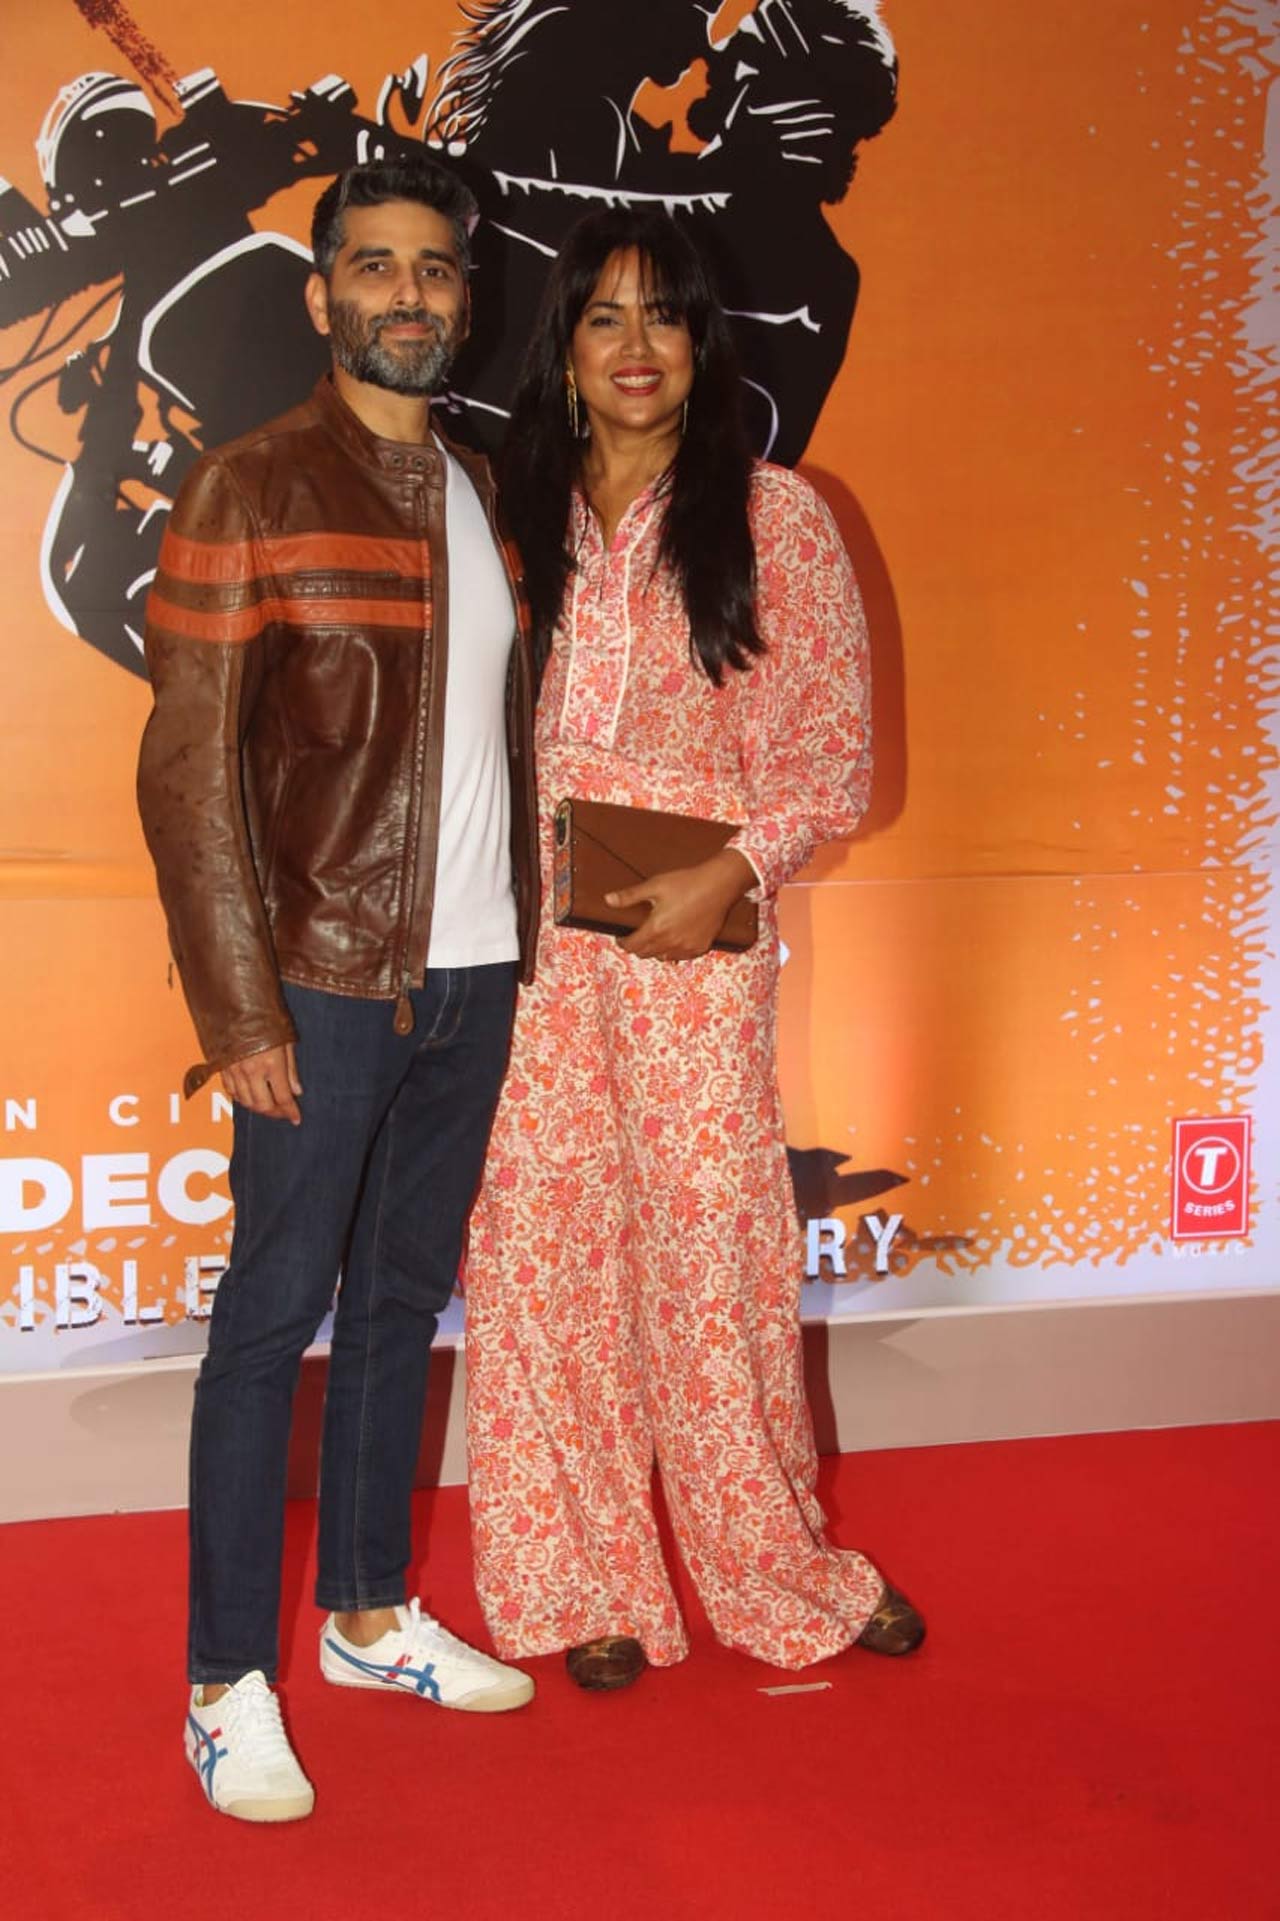 Sameera Reddy and her husband Akshai Varde were all smiles as they walked the red carpet together.